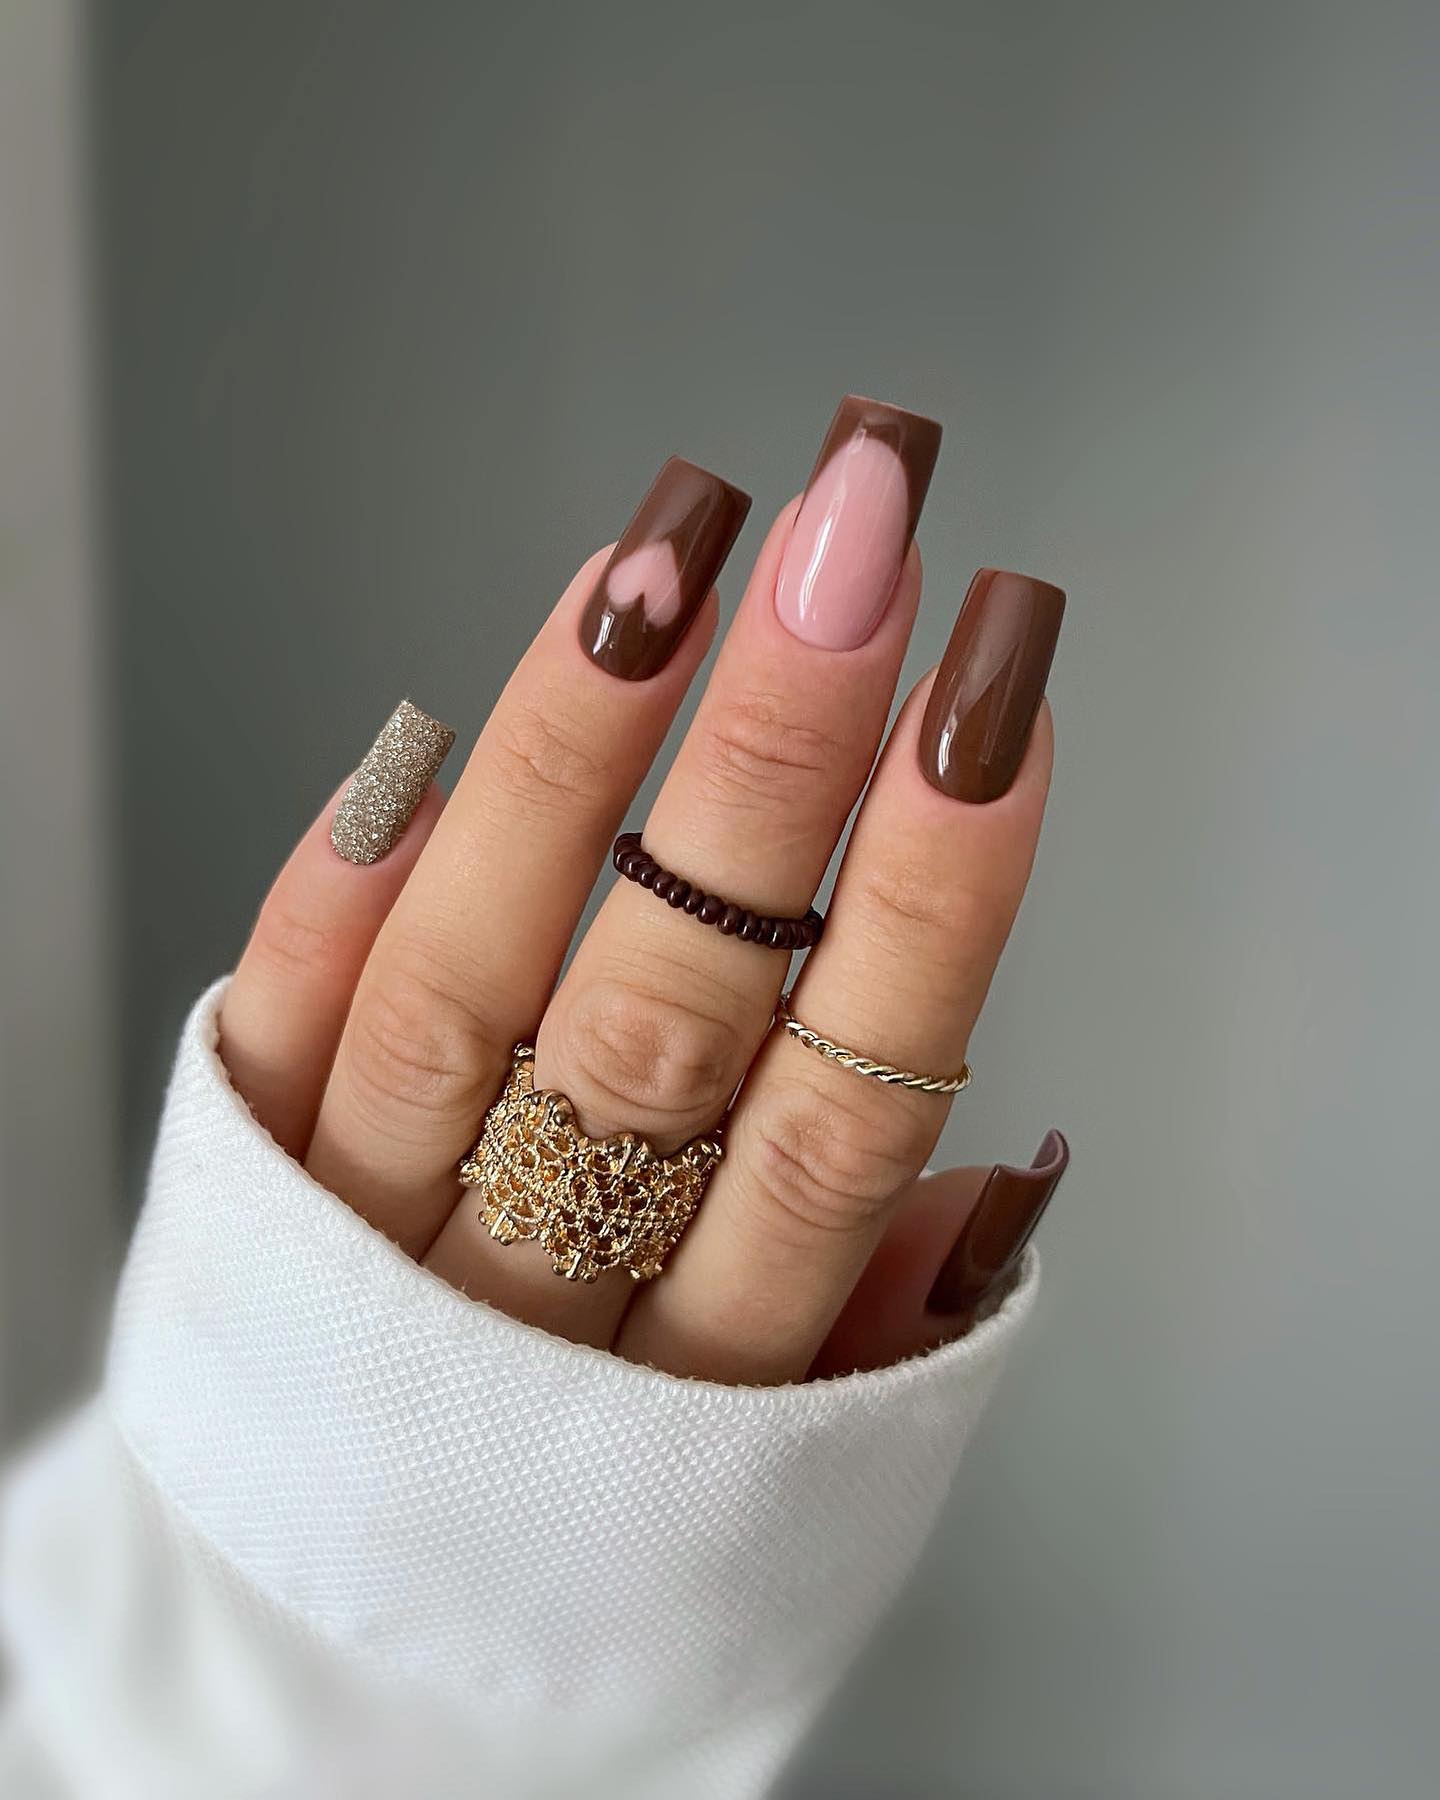 100+ Gorgeous Winter Nail Designs And Ideas images 41